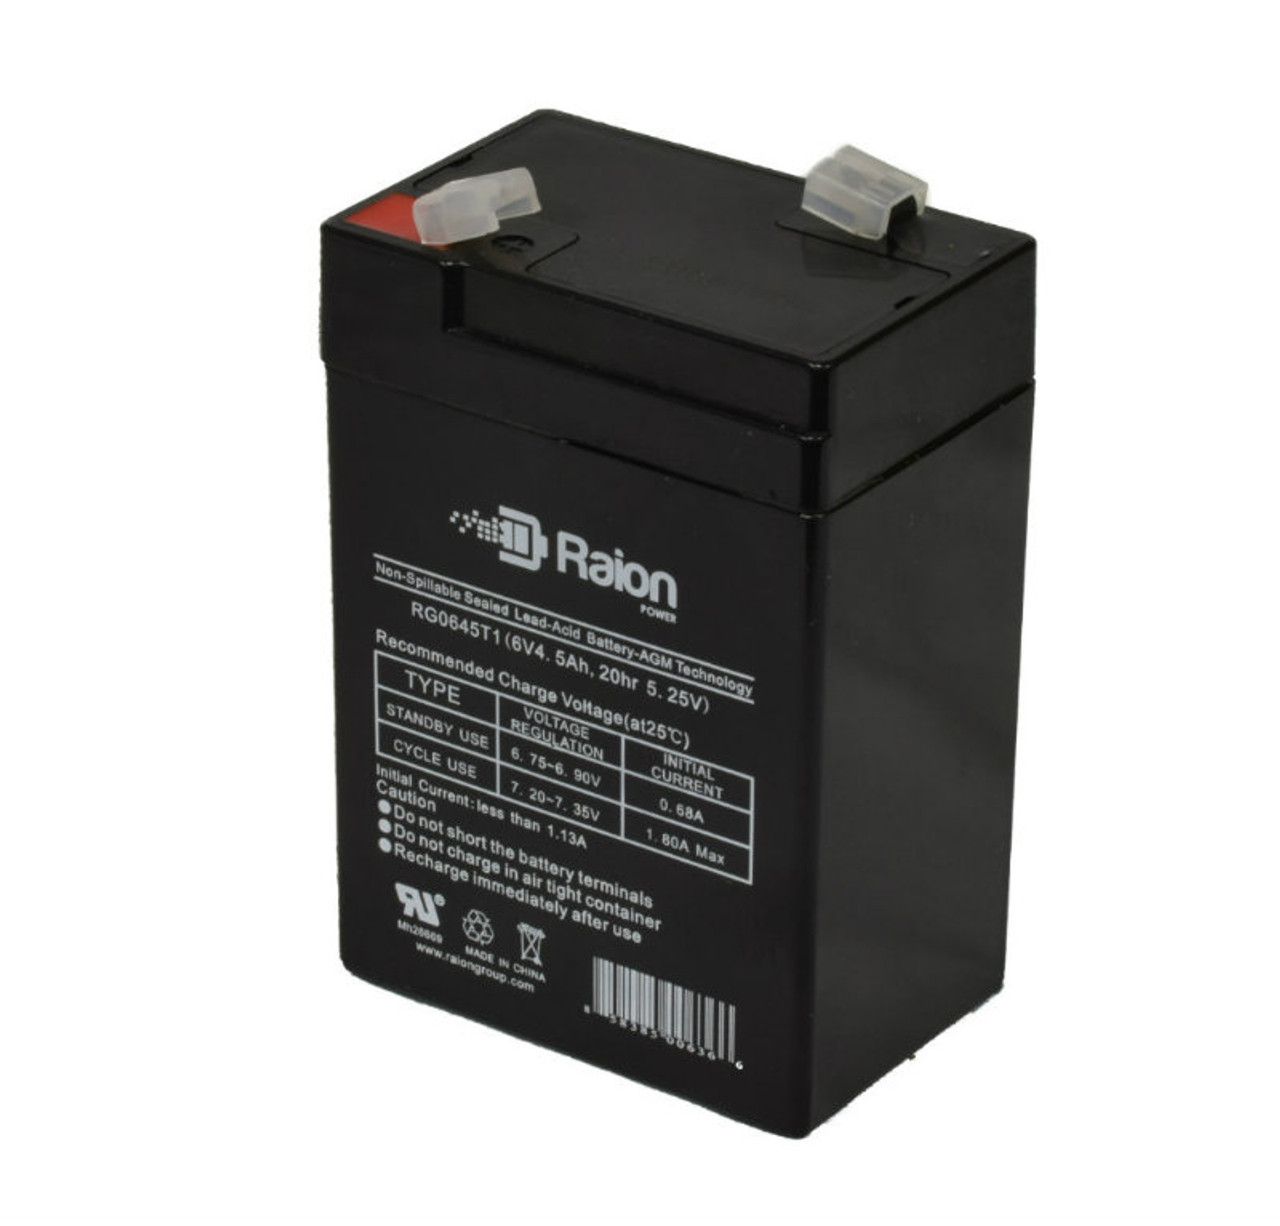 Raion Power RG0645T1 6V 4.5Ah Replacement Battery Cartridge for Nair NR6-4.5S